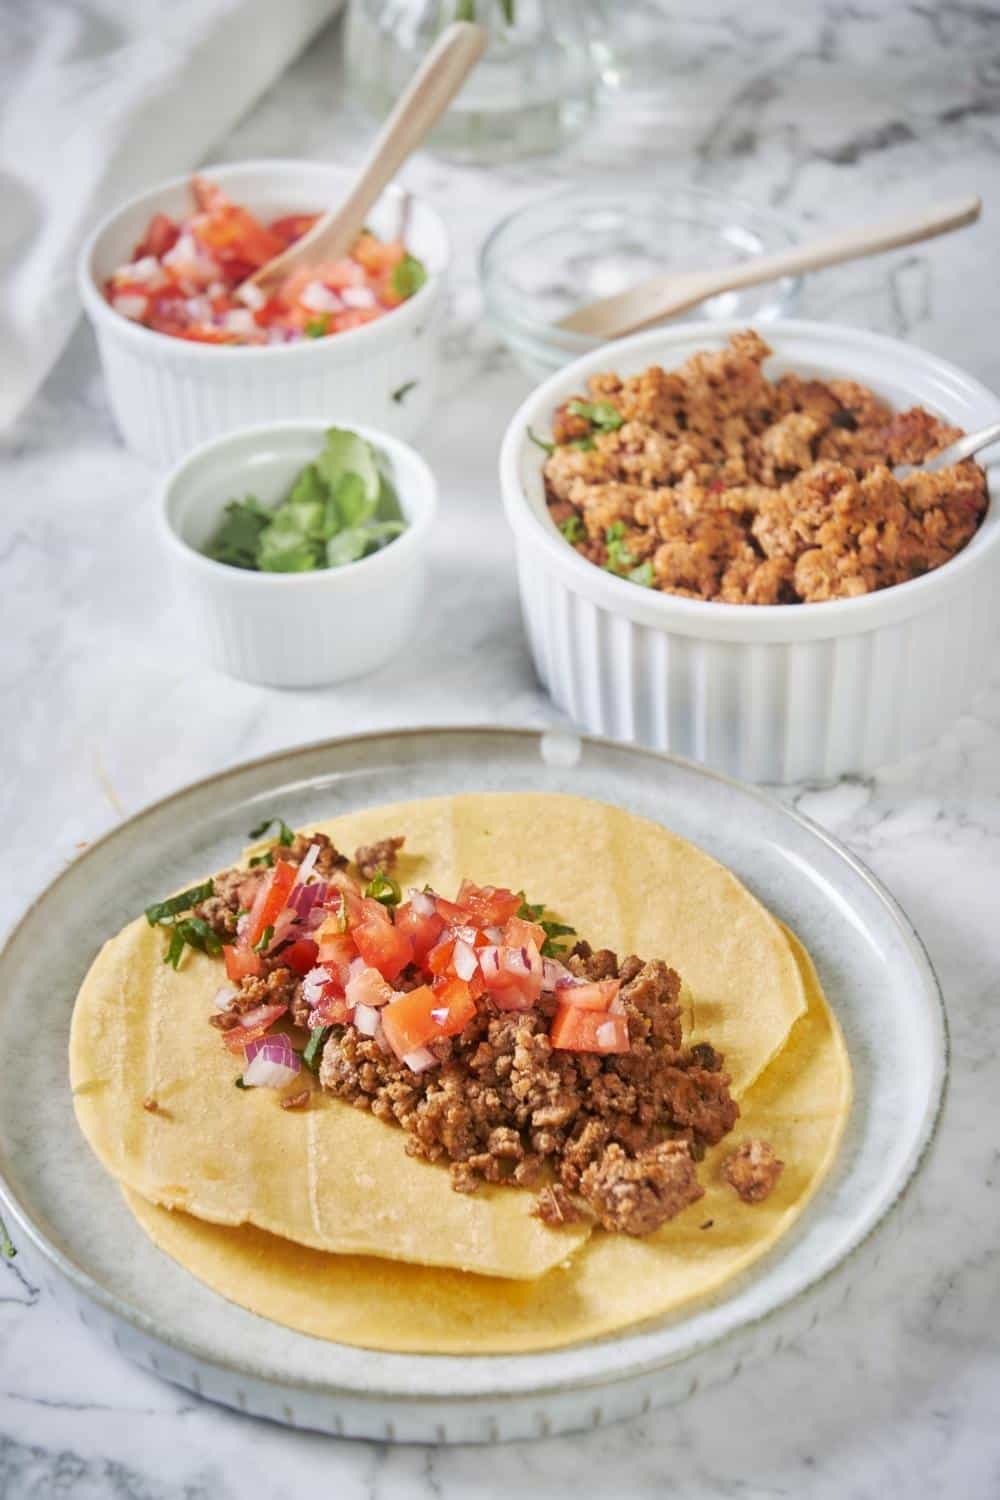 Two fried tortillas are stacked on a plate. The top tortilla has a generous serving of chorizo with fresh salsa and cilantro. In the background is a bowl of cooked chorizo, a bowl of fresh salsa, and a small bowl of chopped cilantro.